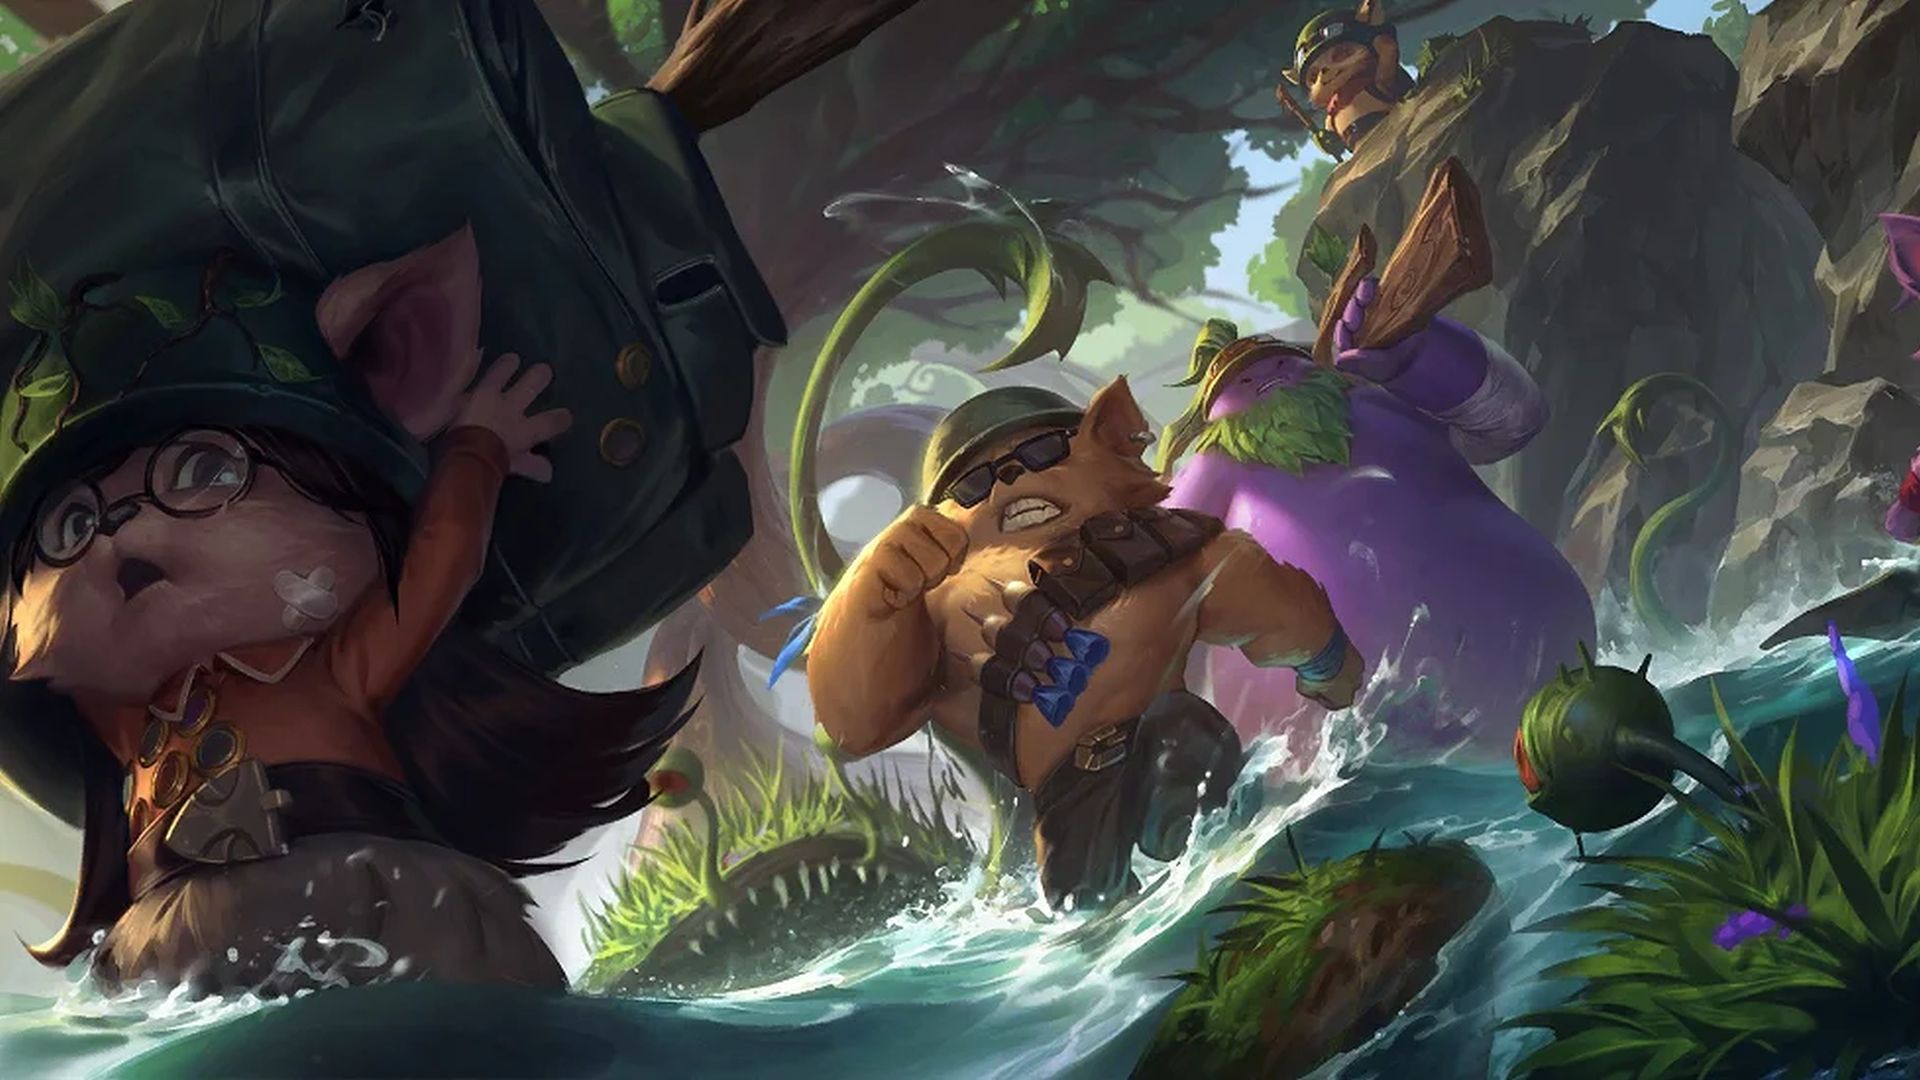 Riot to release an encyclopedia for fans to explore League of Legends'  expansive lore - Dot Esports